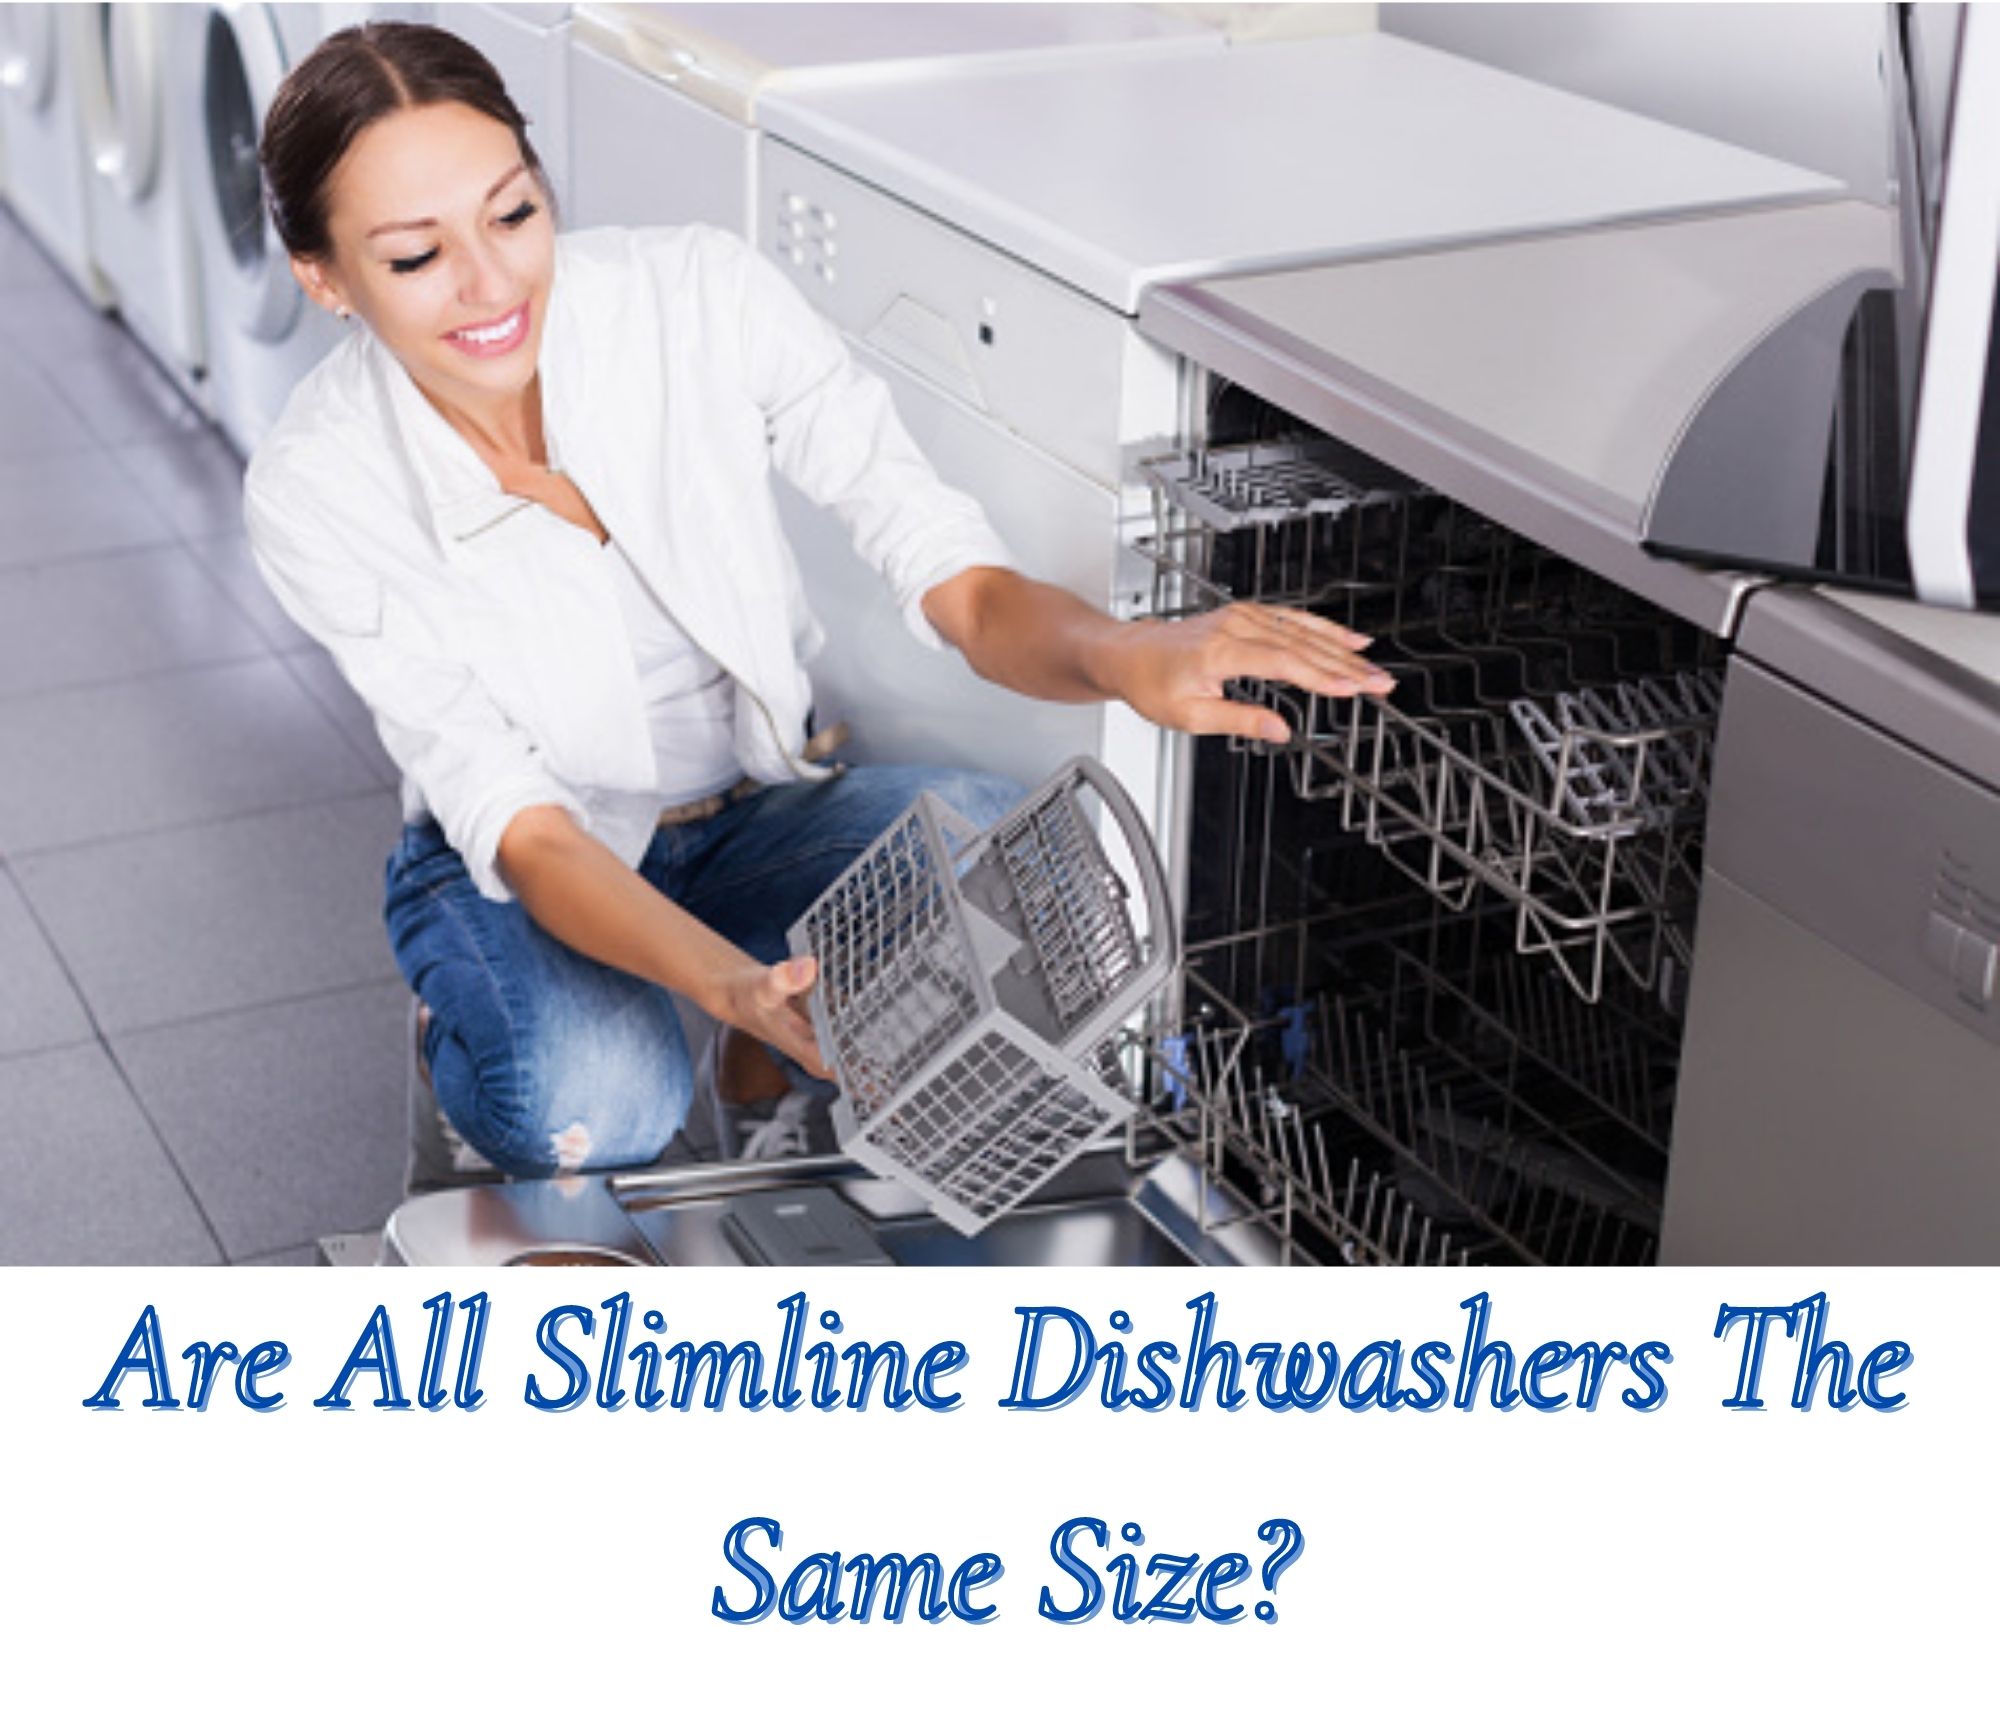 Are All Slimline Dishwashers Are The Same Size